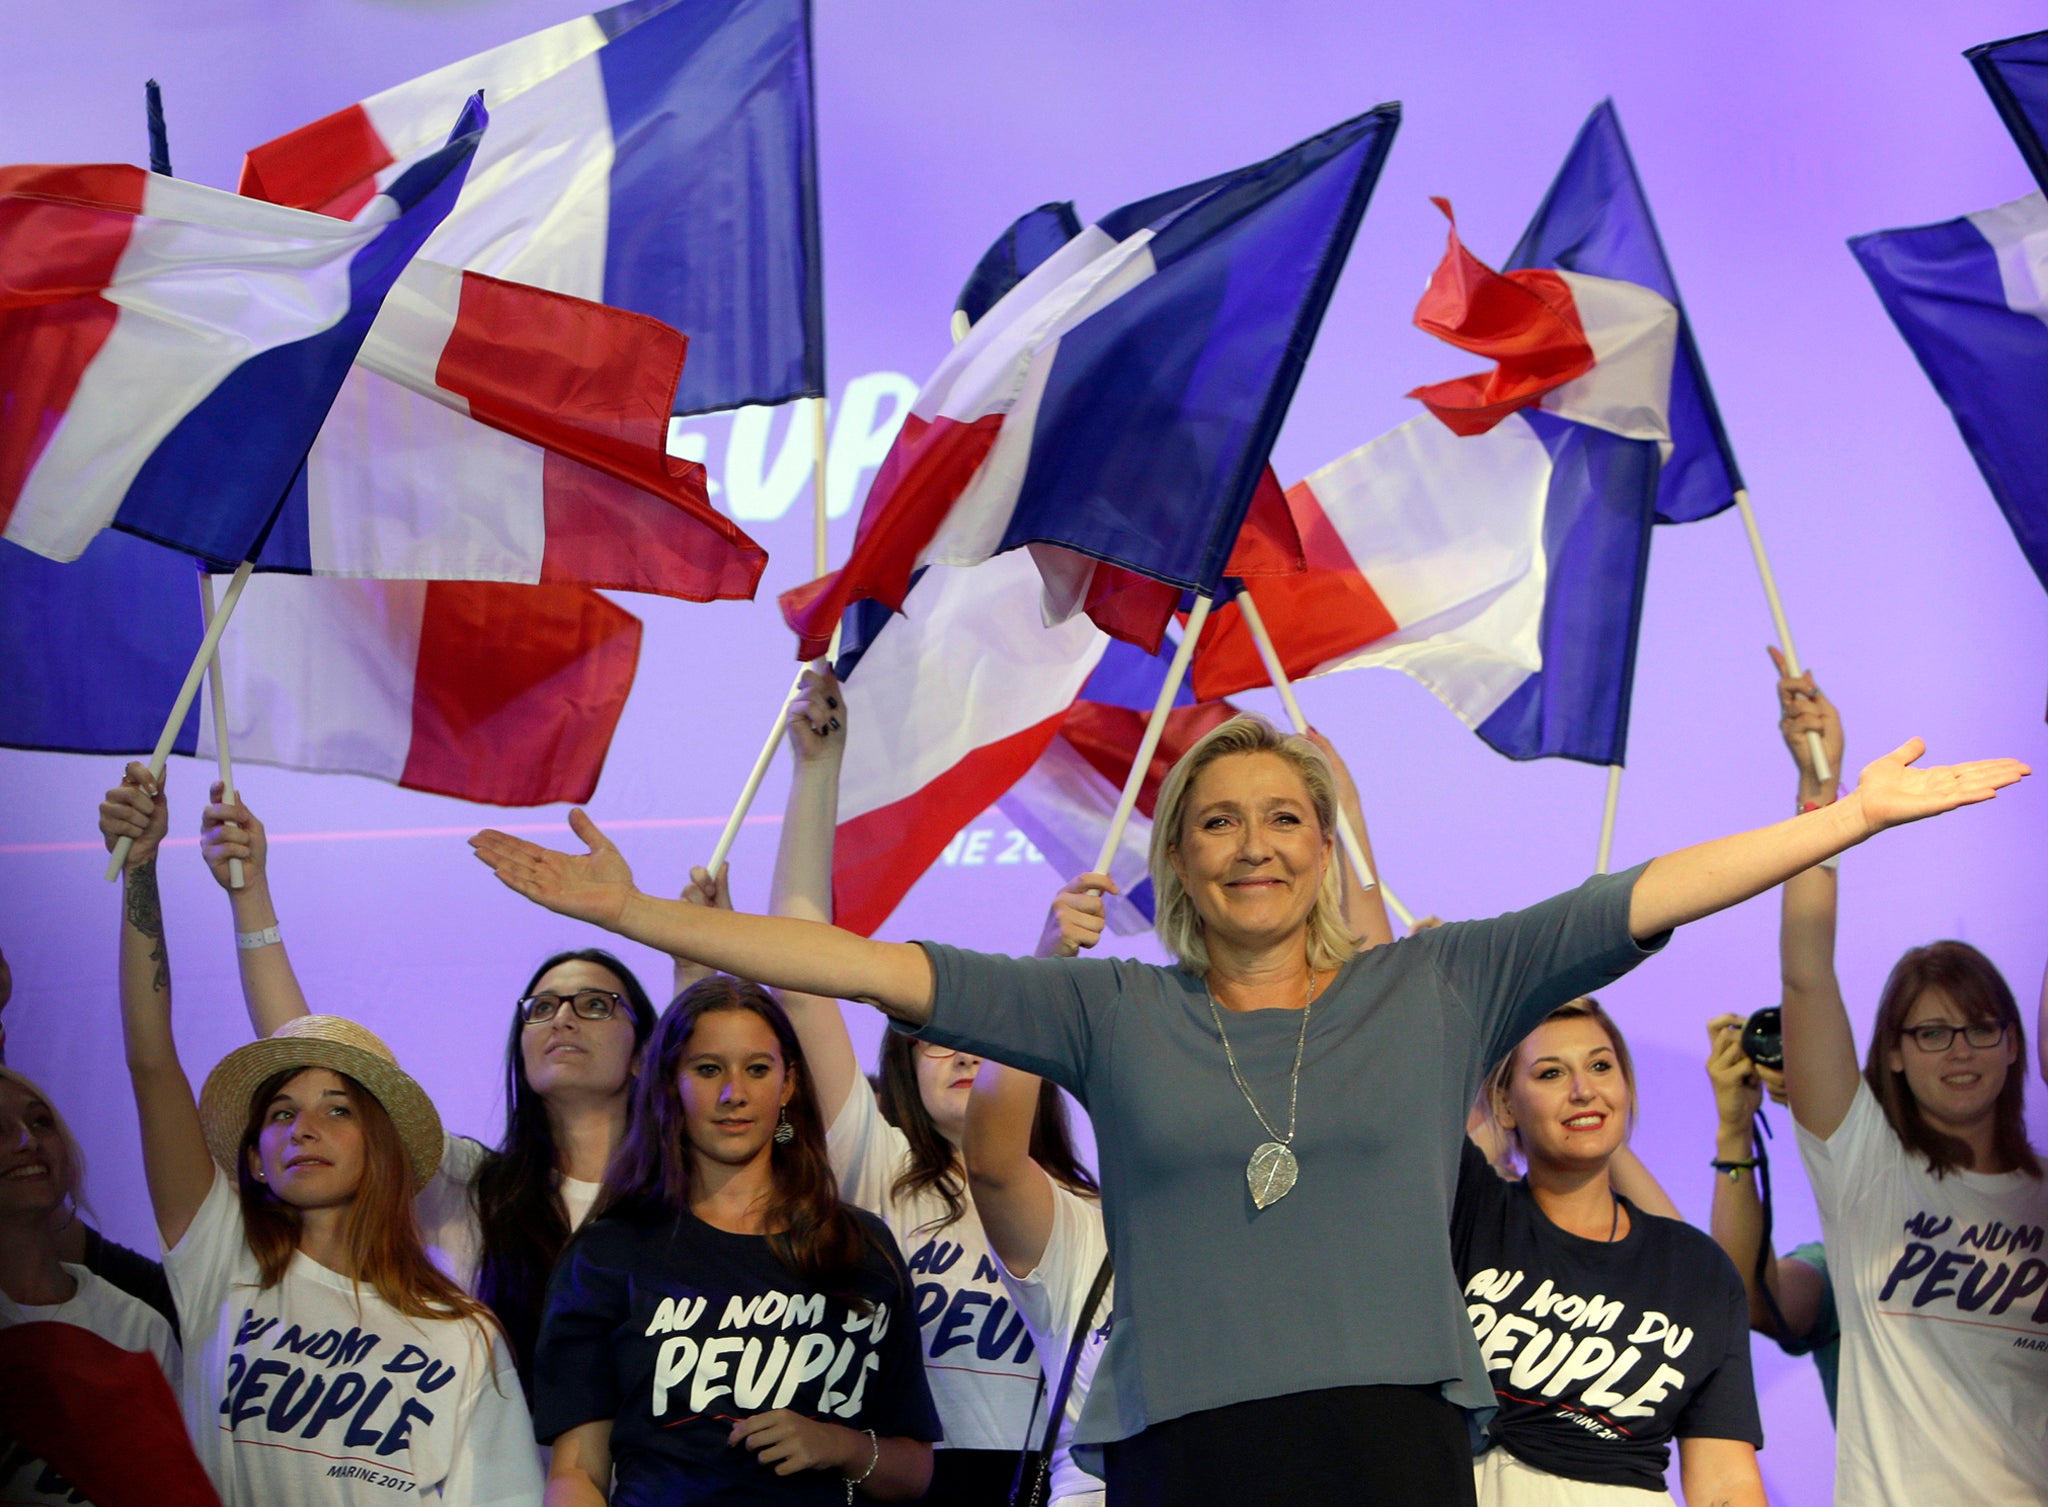 France’s far-right National Front leader Marine Le Pen waves to supporters during a summer meeting in Frejus, southern France